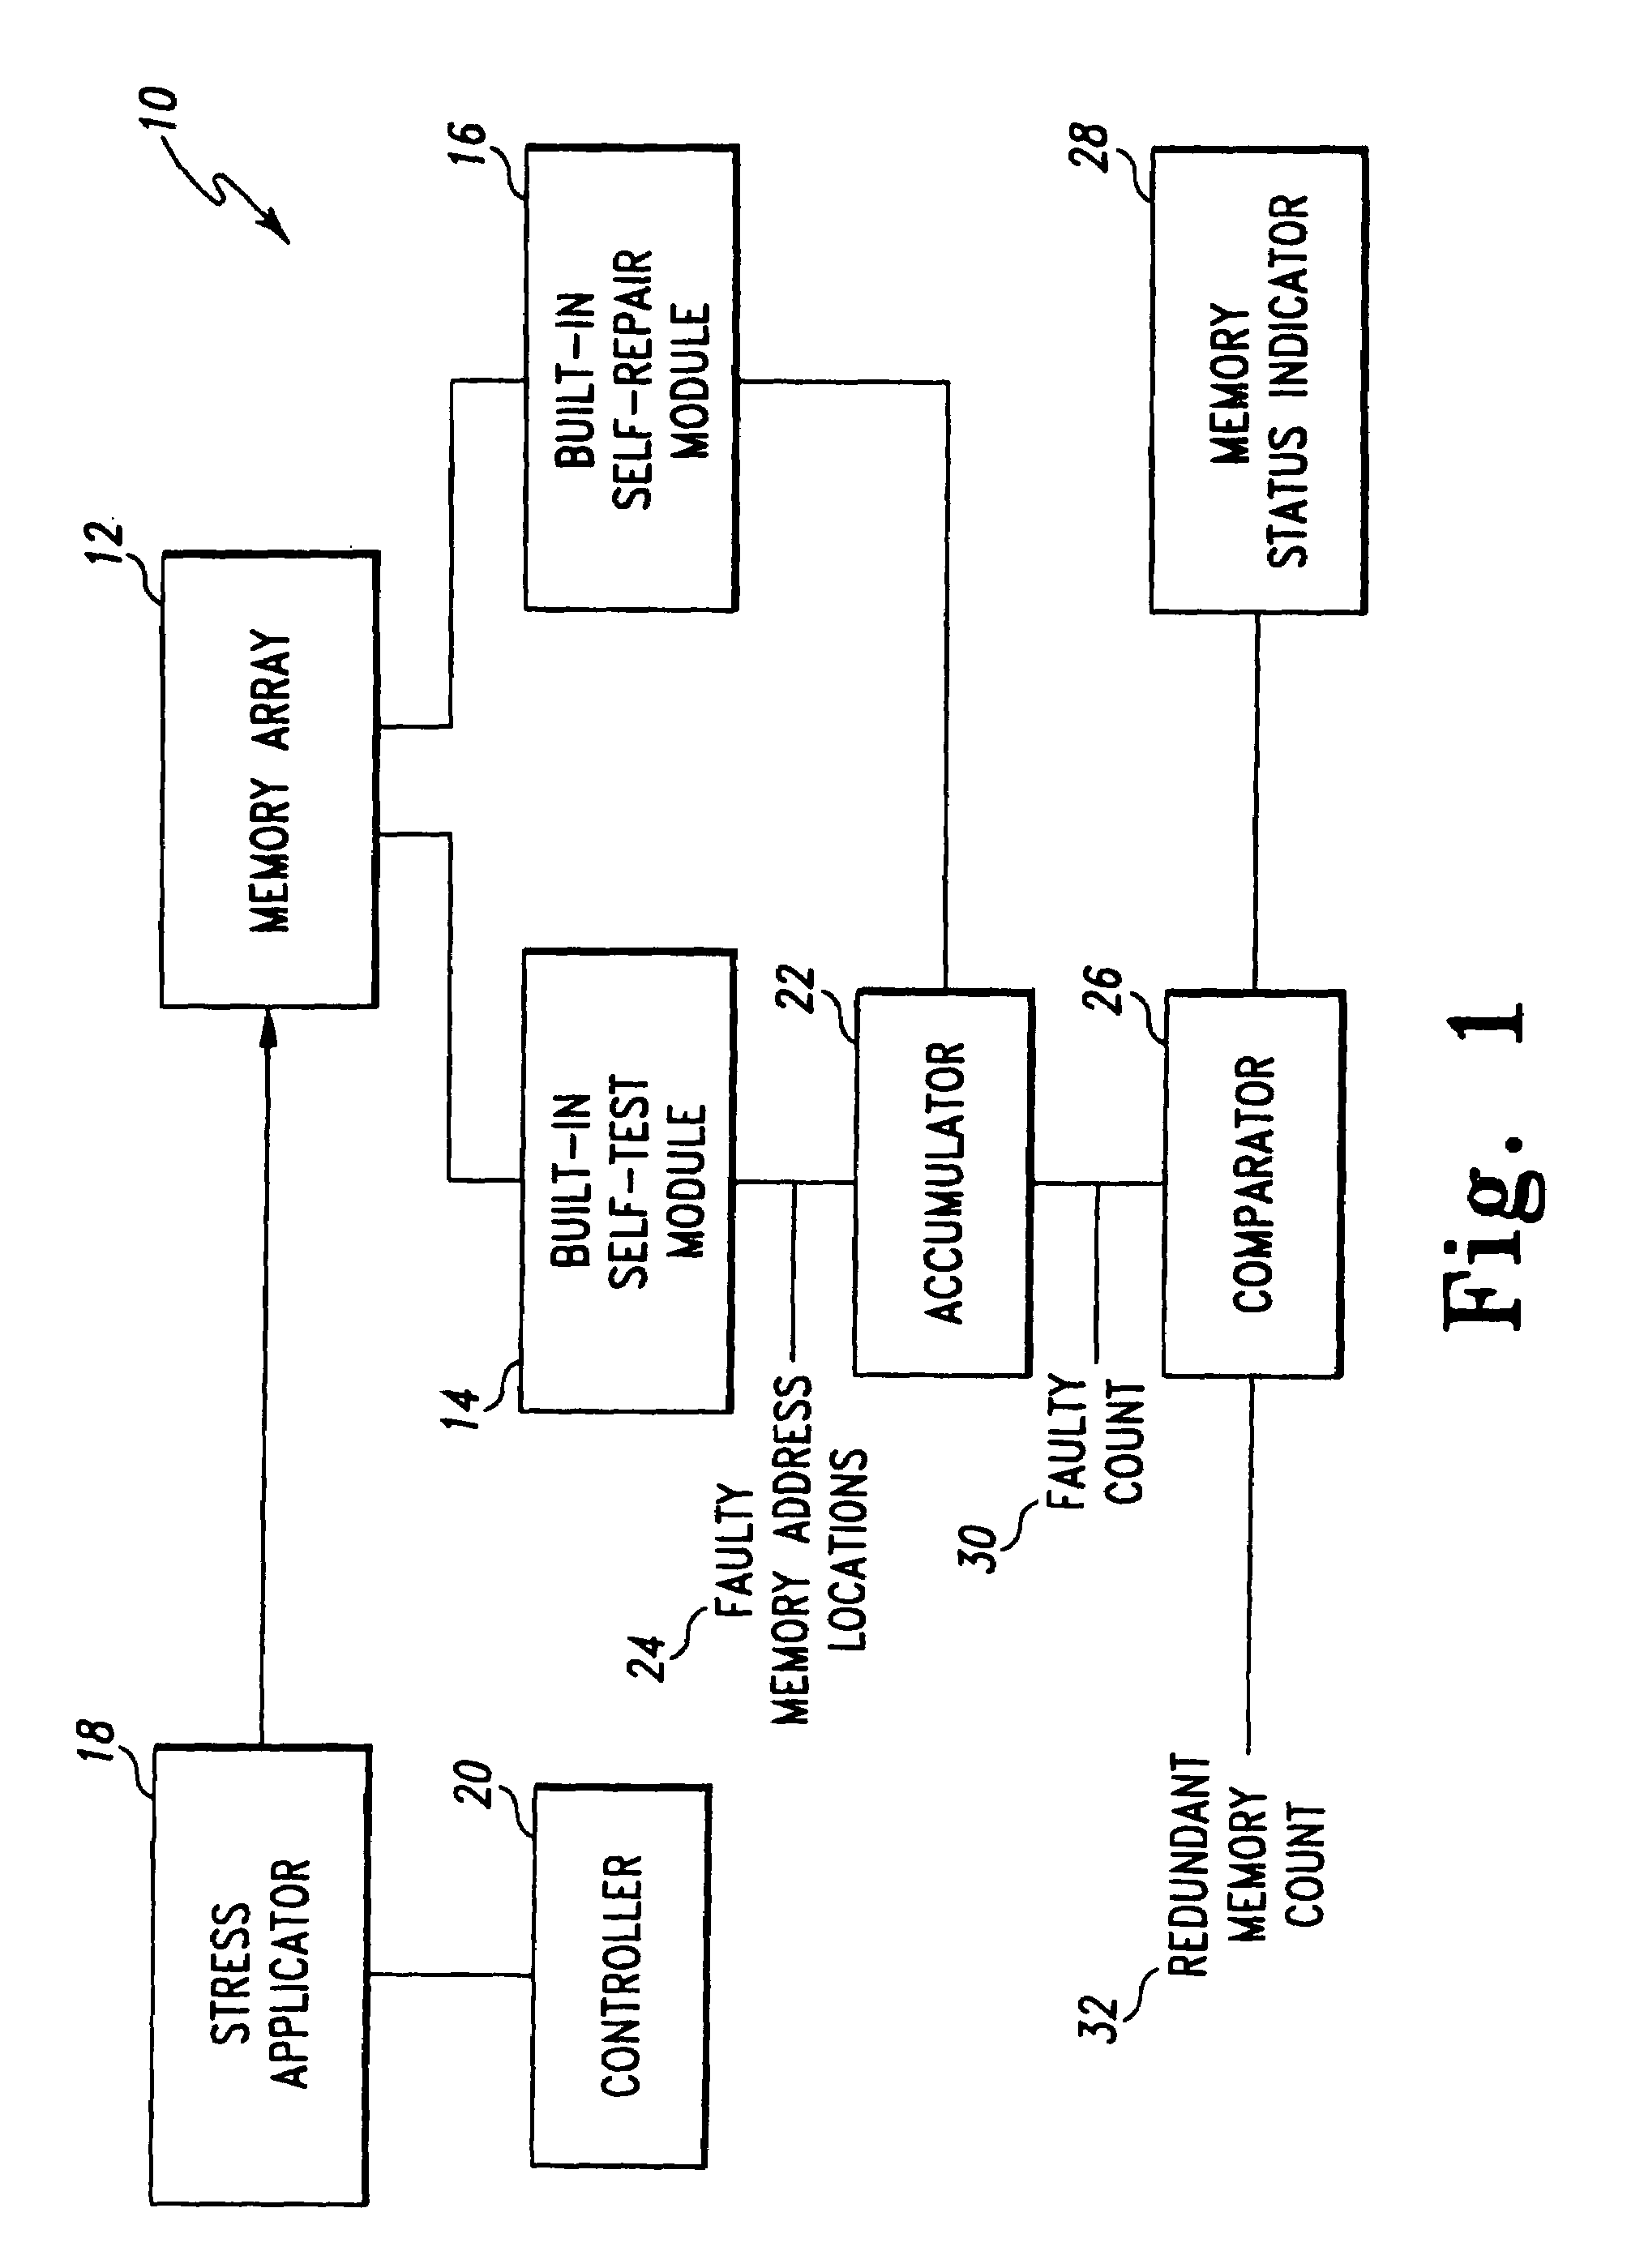 Method and system for performing built-in-self-test routines using an accumulator to store fault information